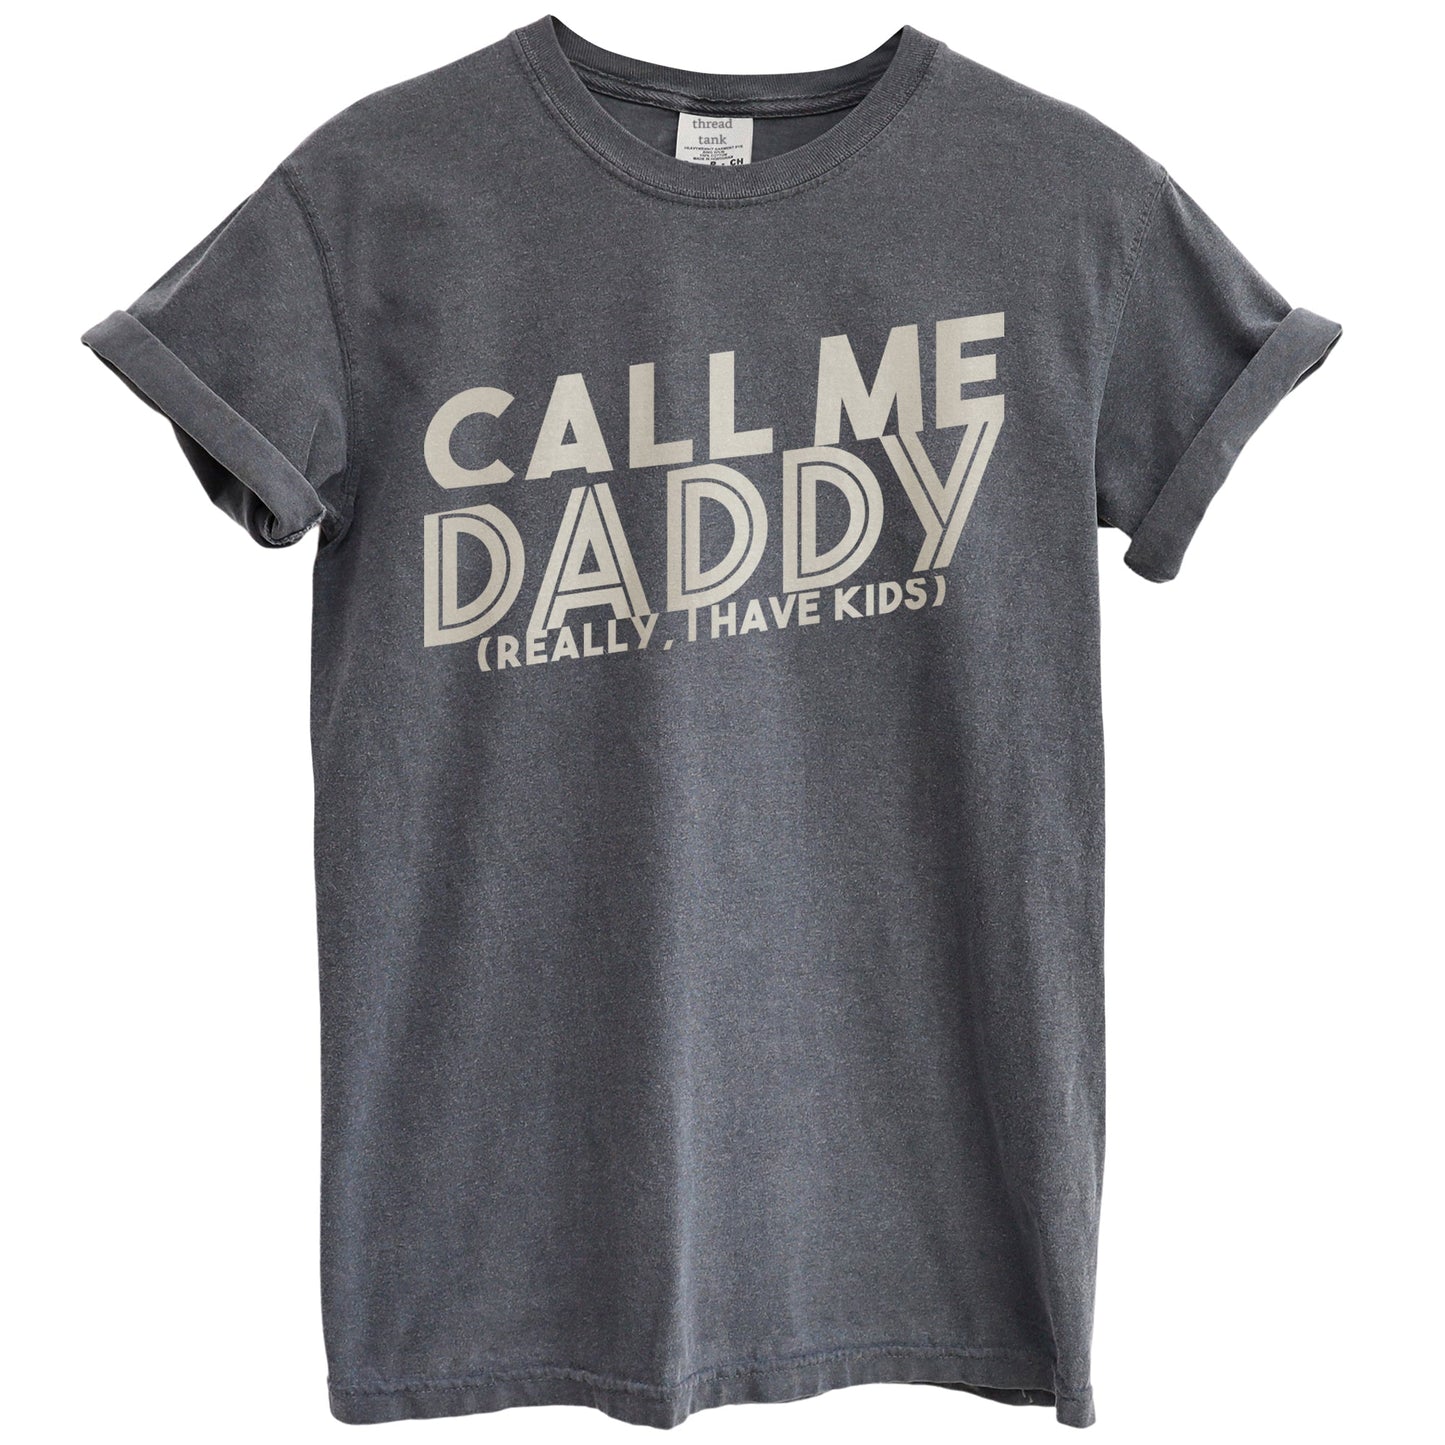 Call Me Daddy Garment-Dyed Tee - Stories You Can Wear